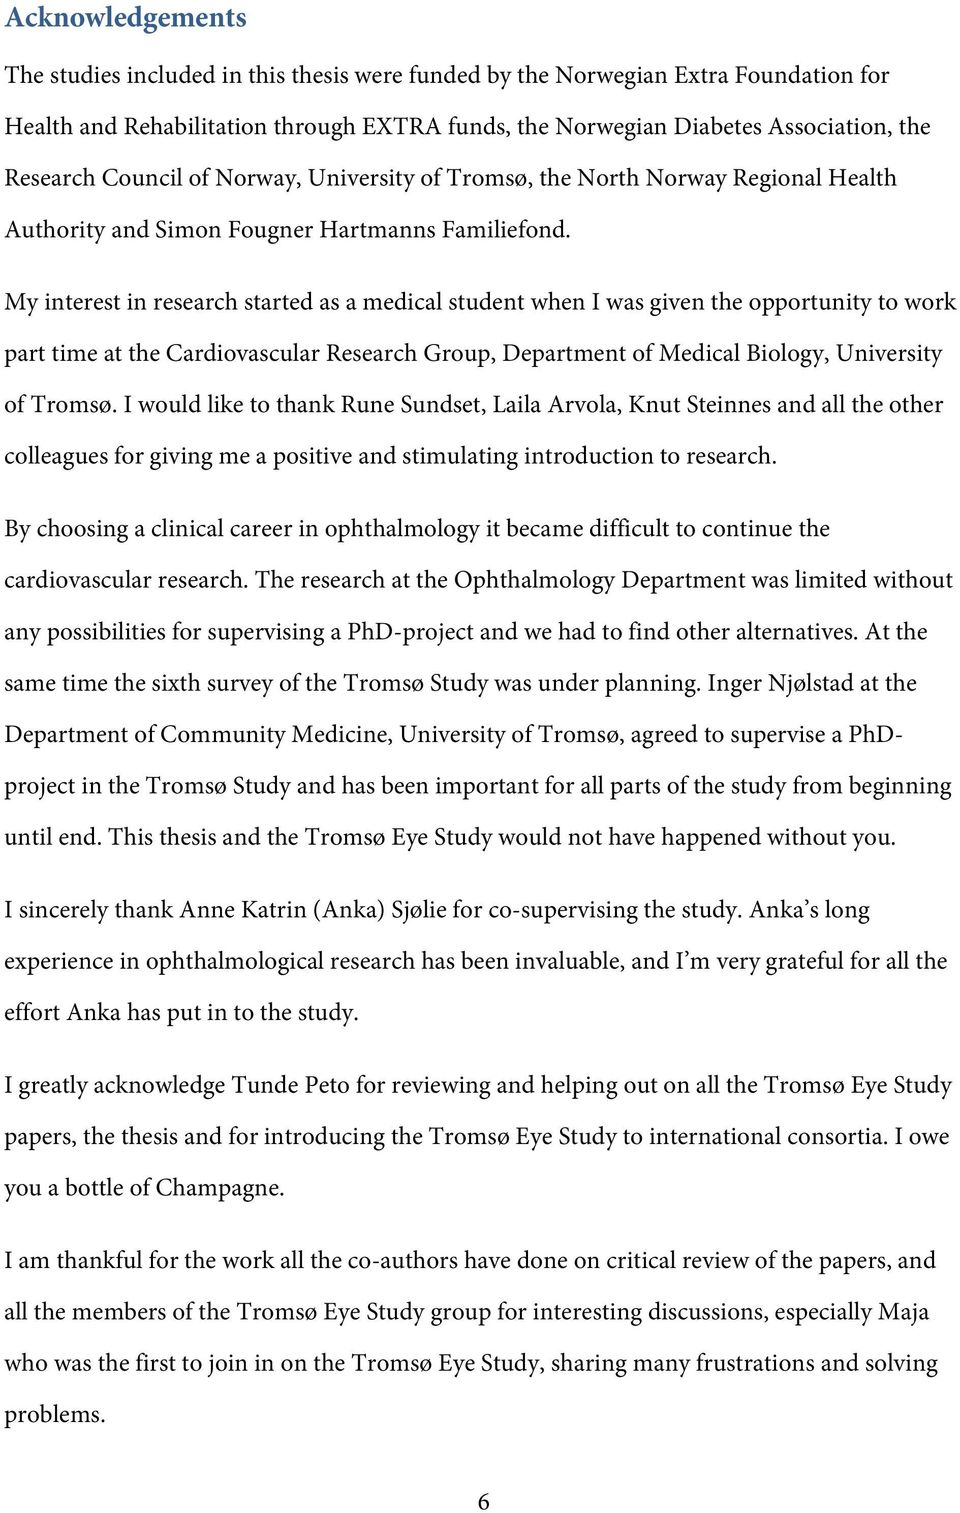 My interest in researh started as a medial student when I was given the opportunity to work part time at the Cardiovasular Researh Group, Department of Medial Biology, University of Tromsø.